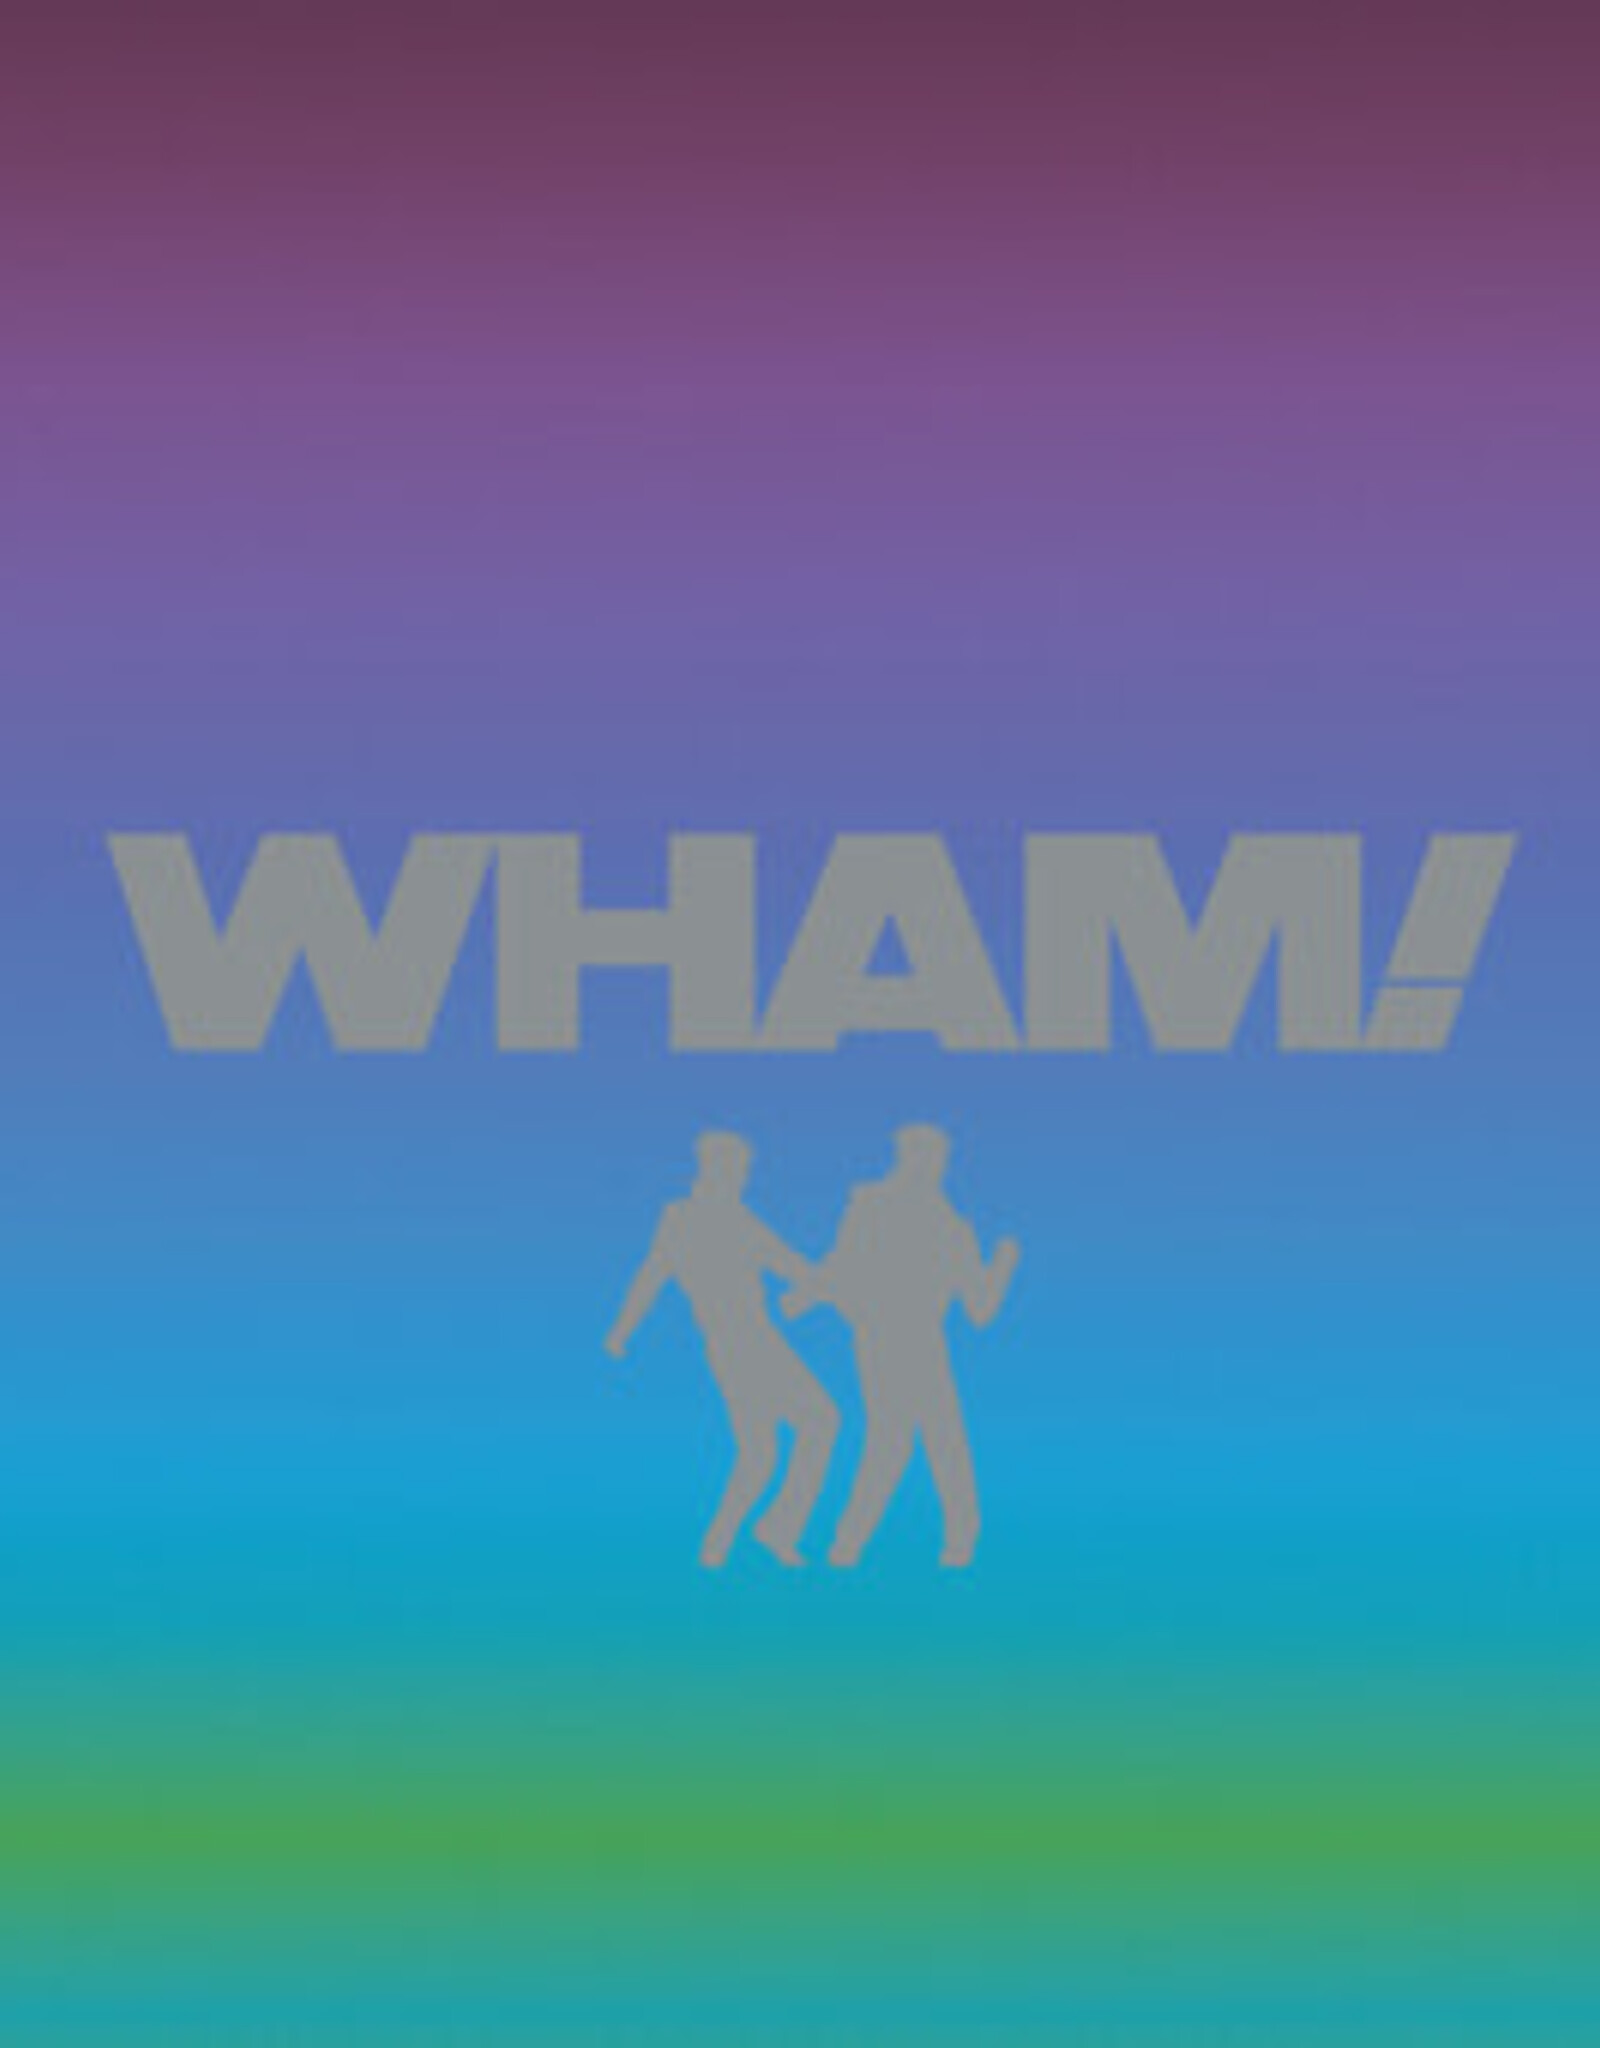 Wham - Echoes from the Edge of Heaven (The Singles)